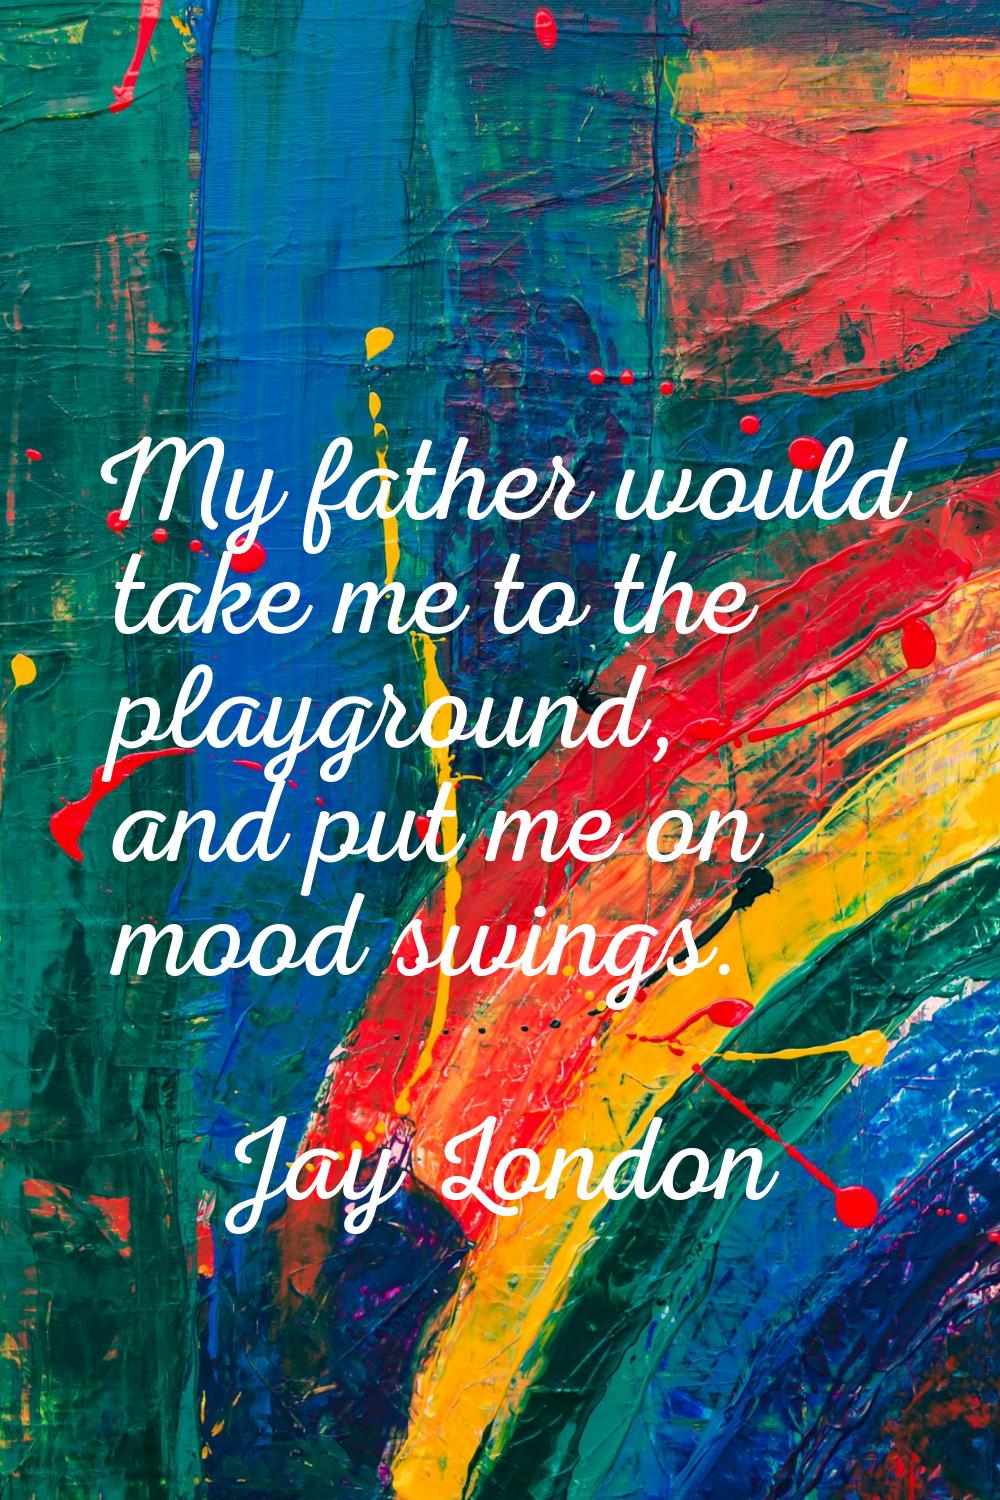 My father would take me to the playground, and put me on mood swings.